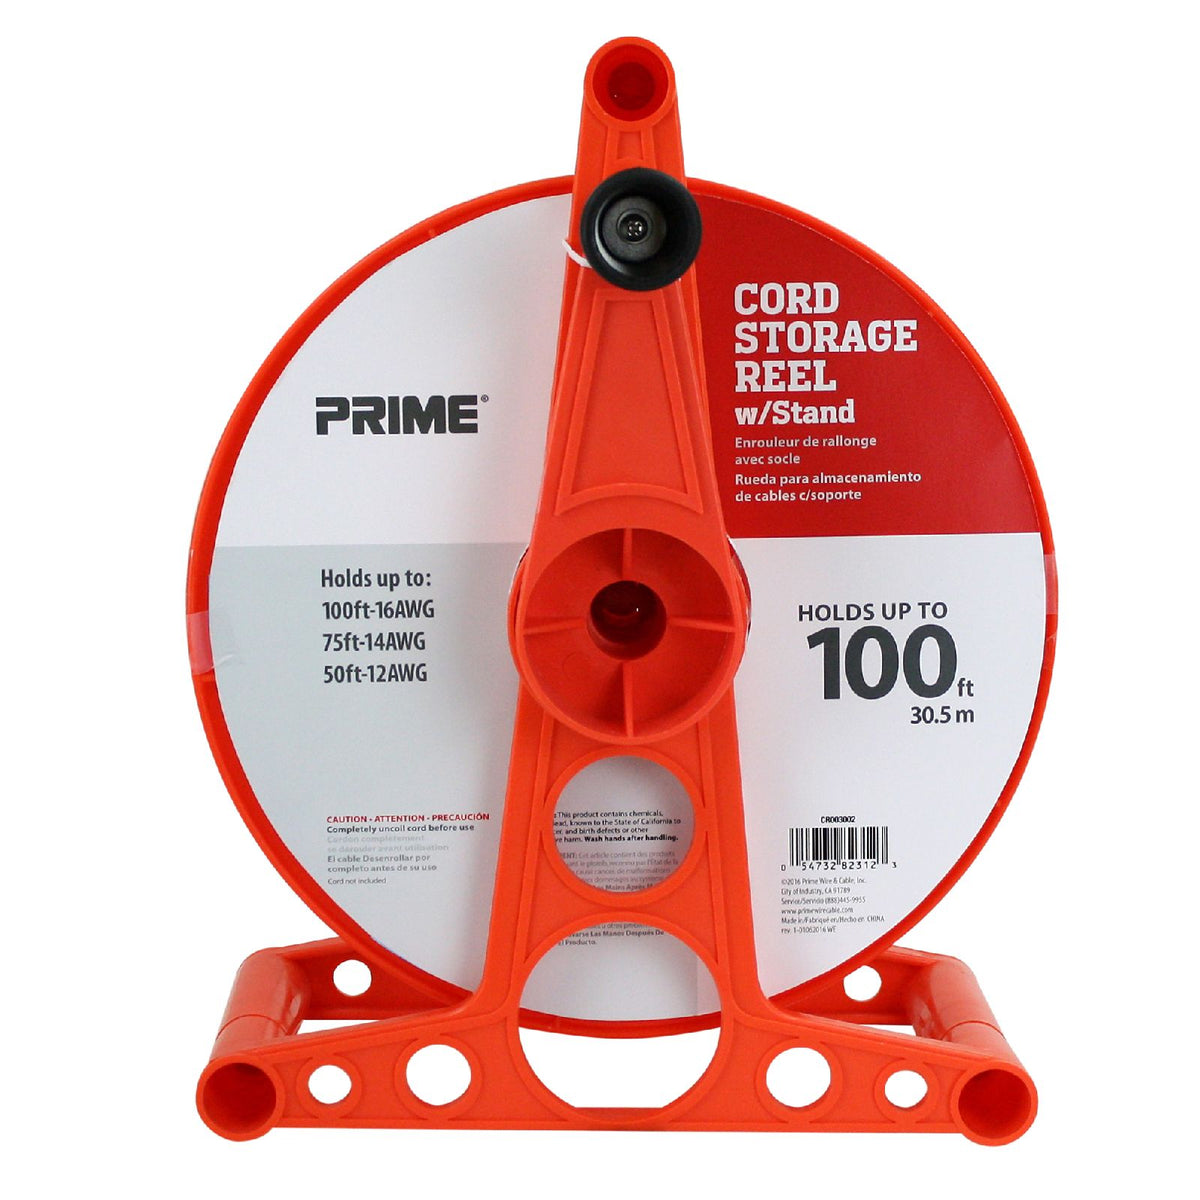 Plastic Cord Storage Reel w/Stand — Prime Wire & Cable Inc.